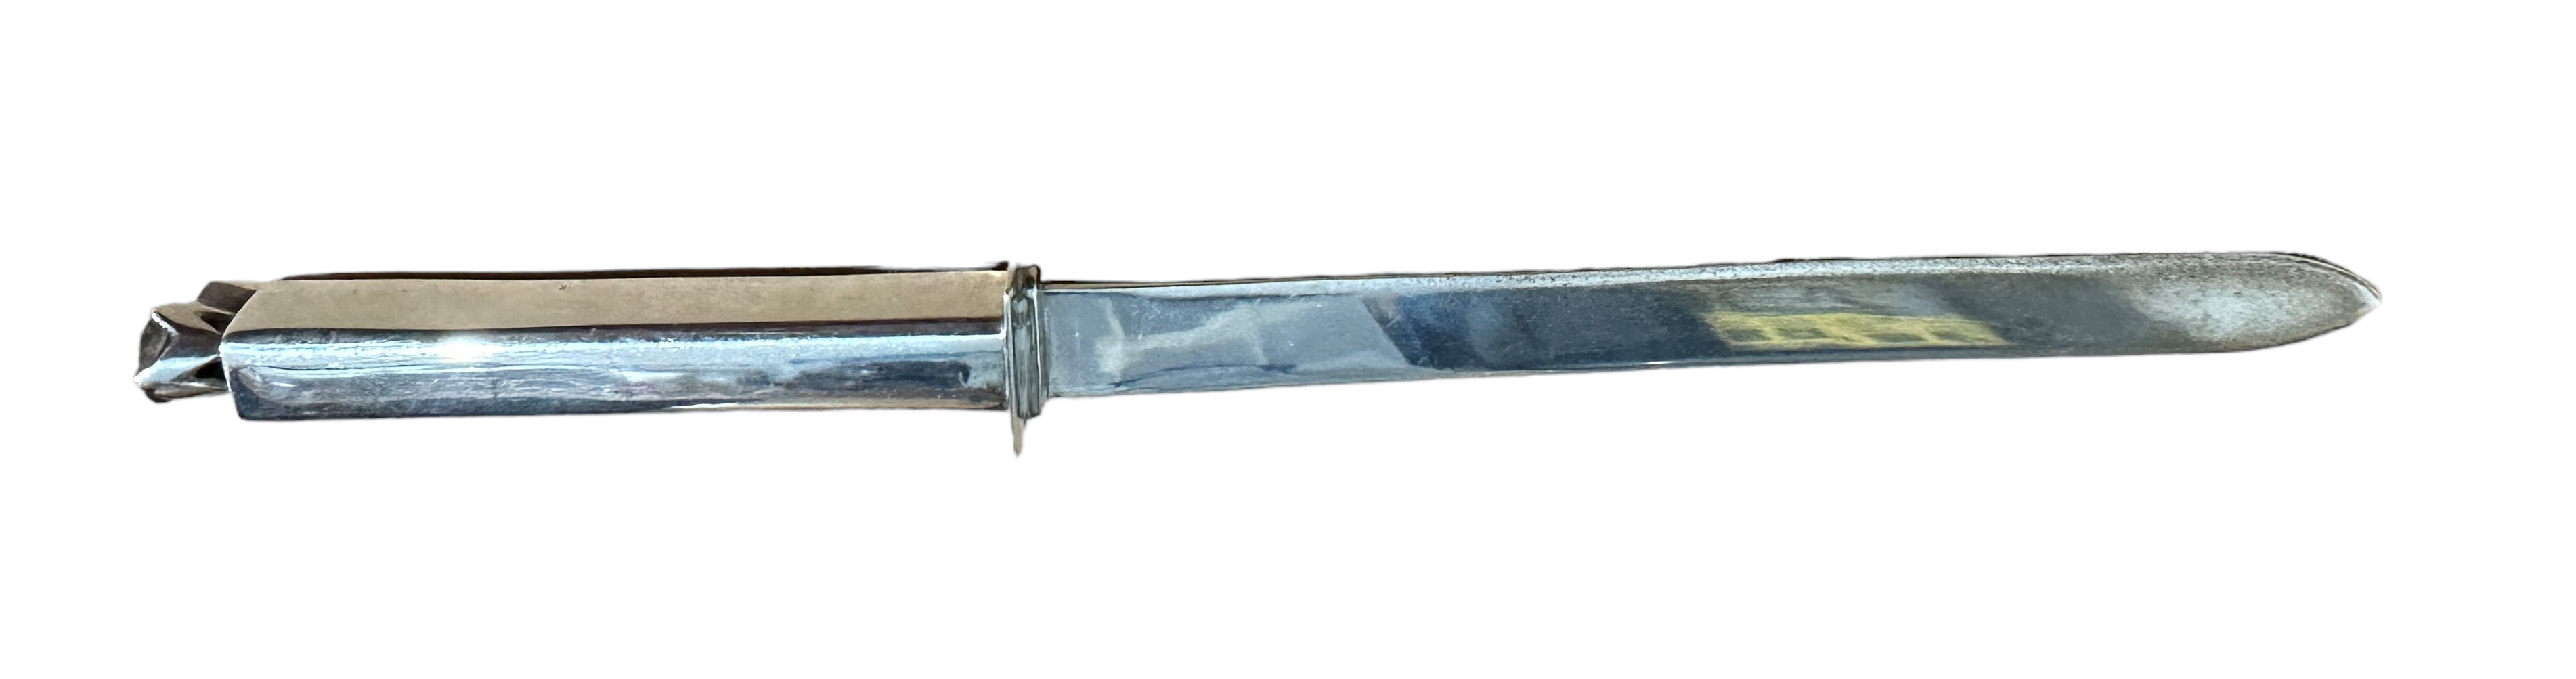 Vintage Scottish Themed Silver Paper Knife with Citrine Stone End - 10 1/2" (26.5cm) long - Image 2 of 5